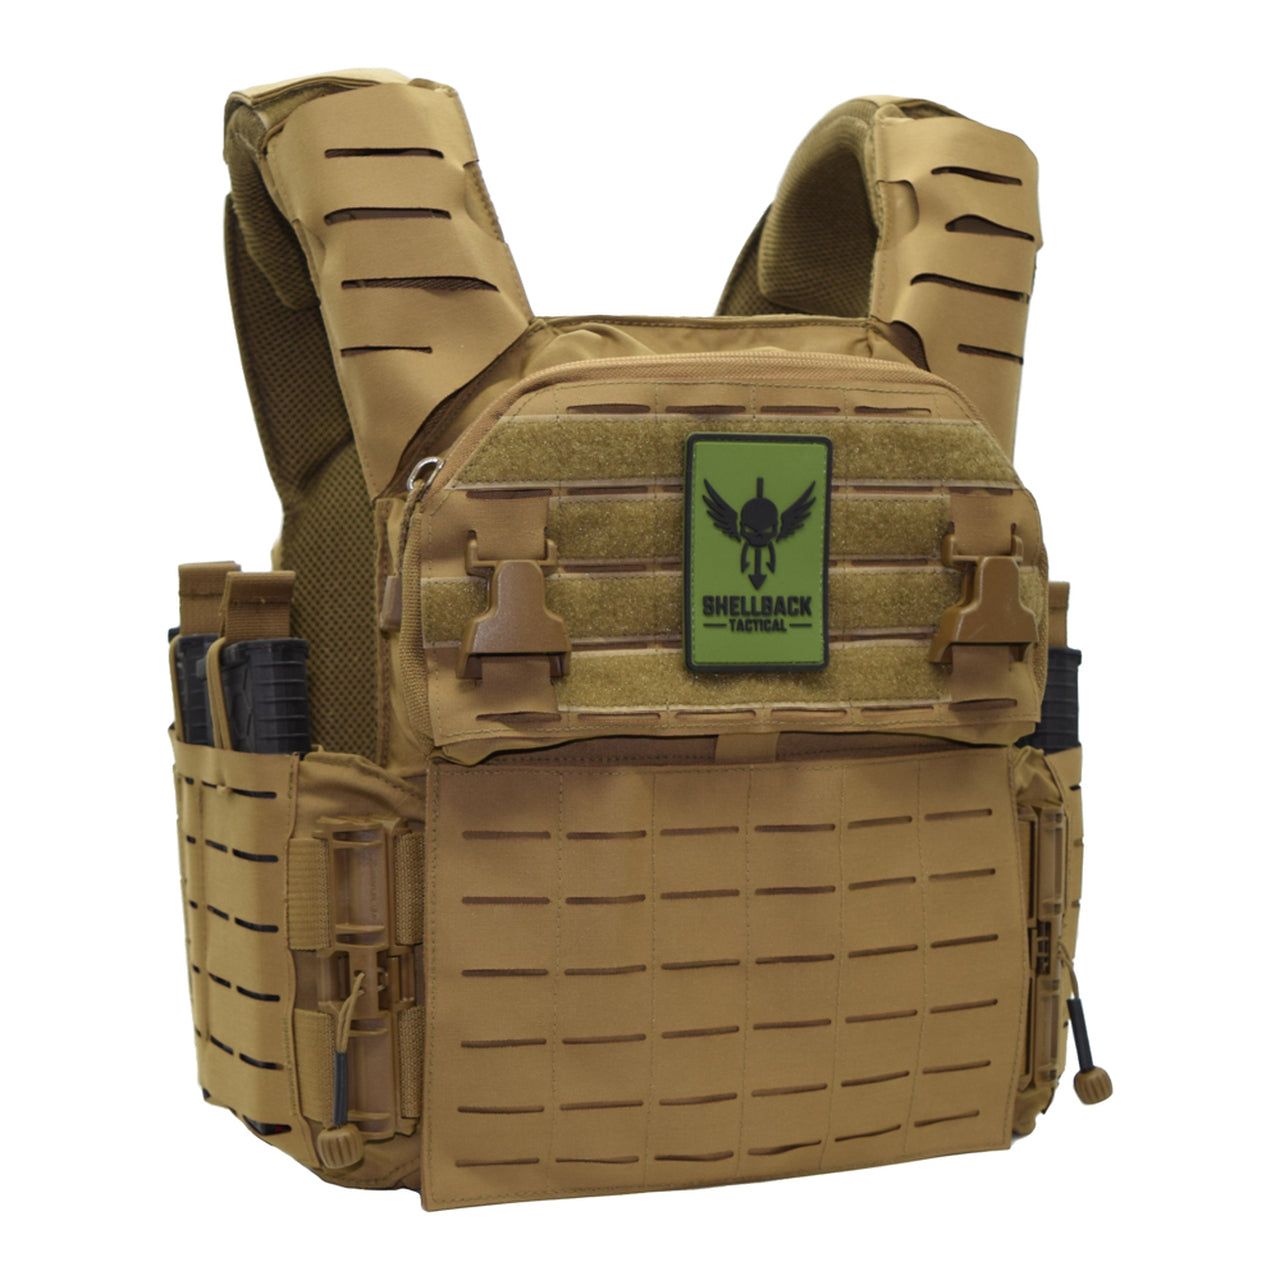 A Shellback Tactical Banshee Elite 3.0 Plate Carrier with a green patch on it.